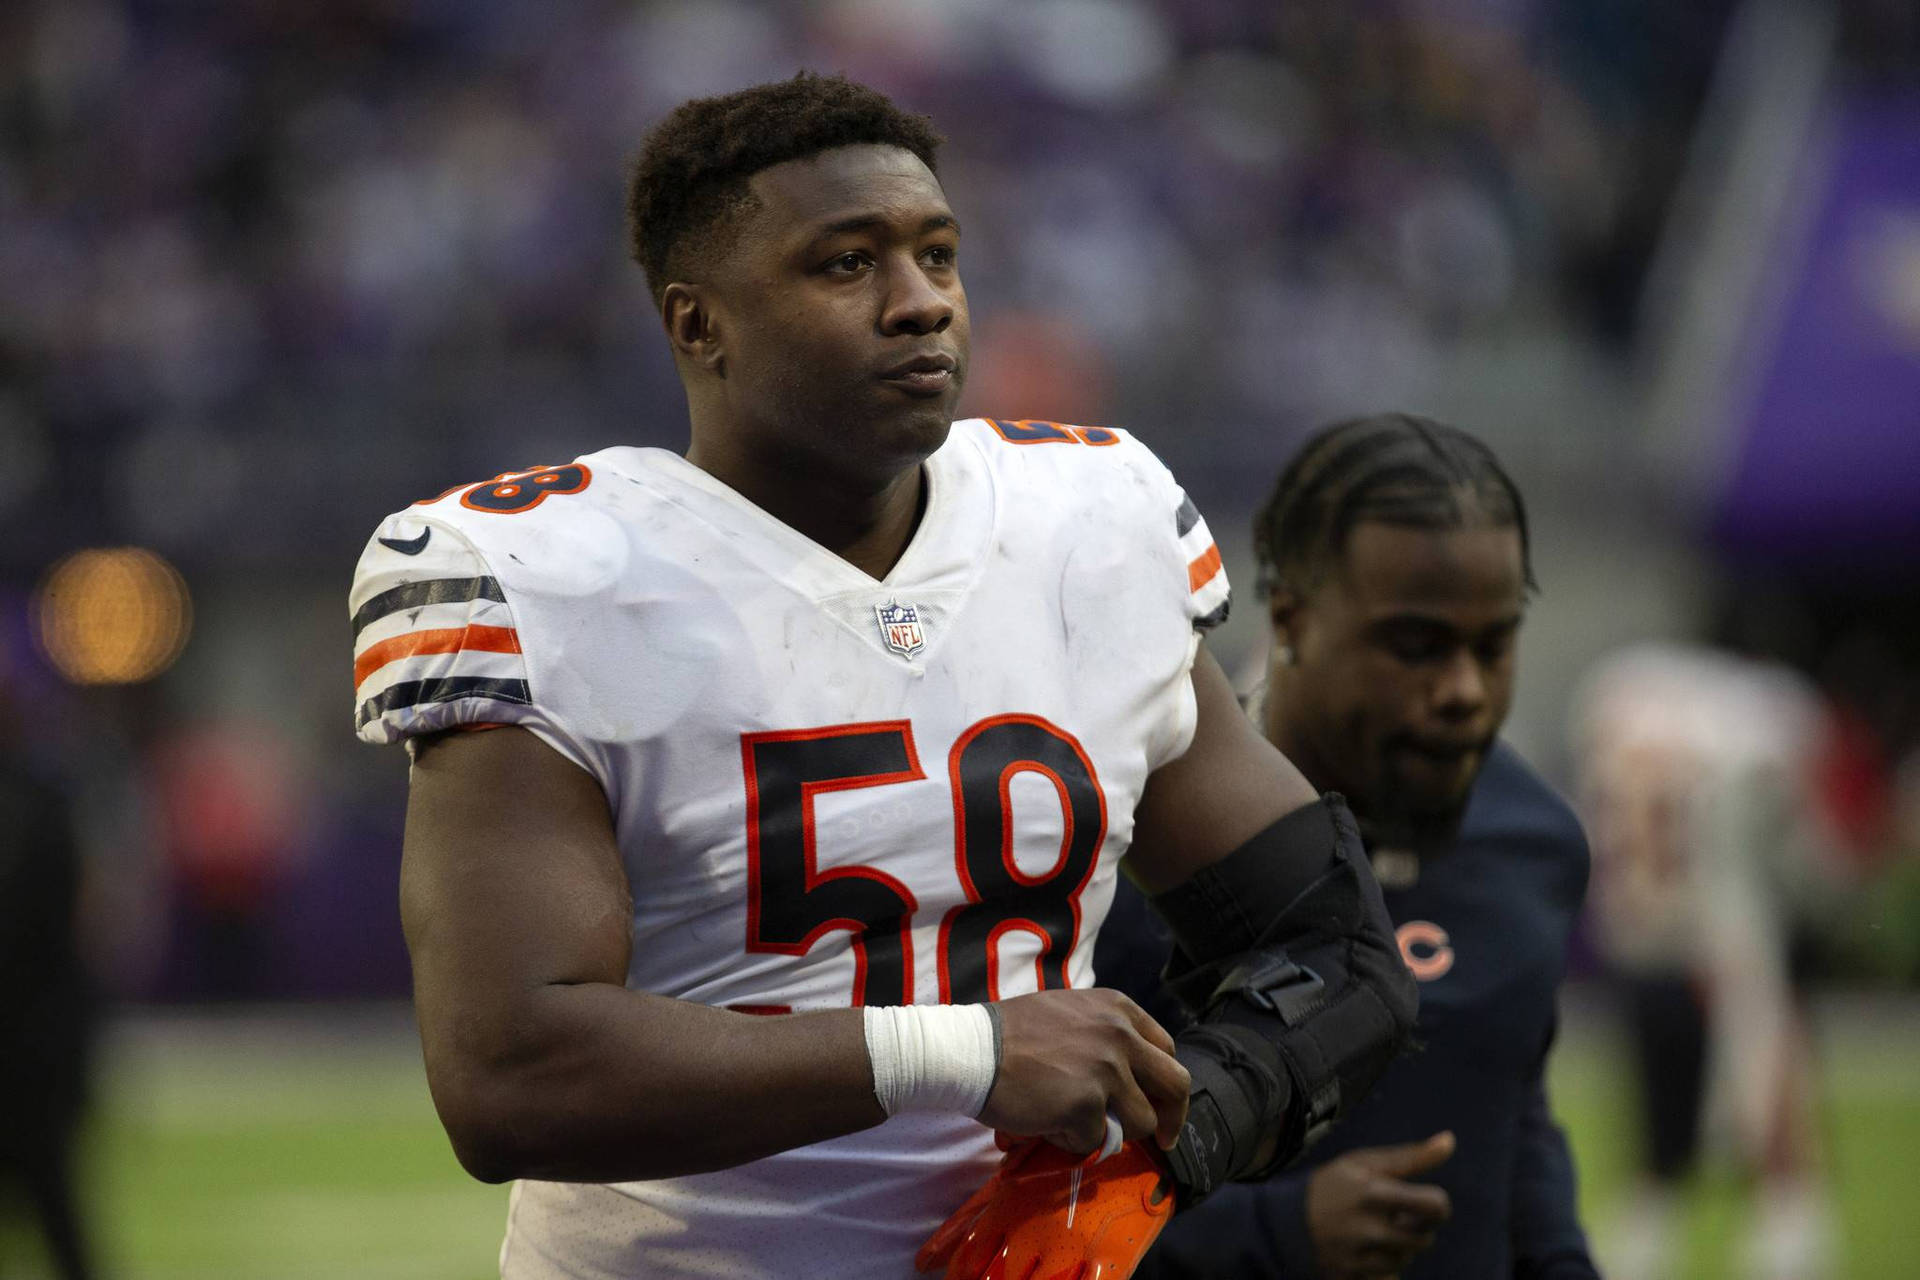 Injured Roquan Smith Background